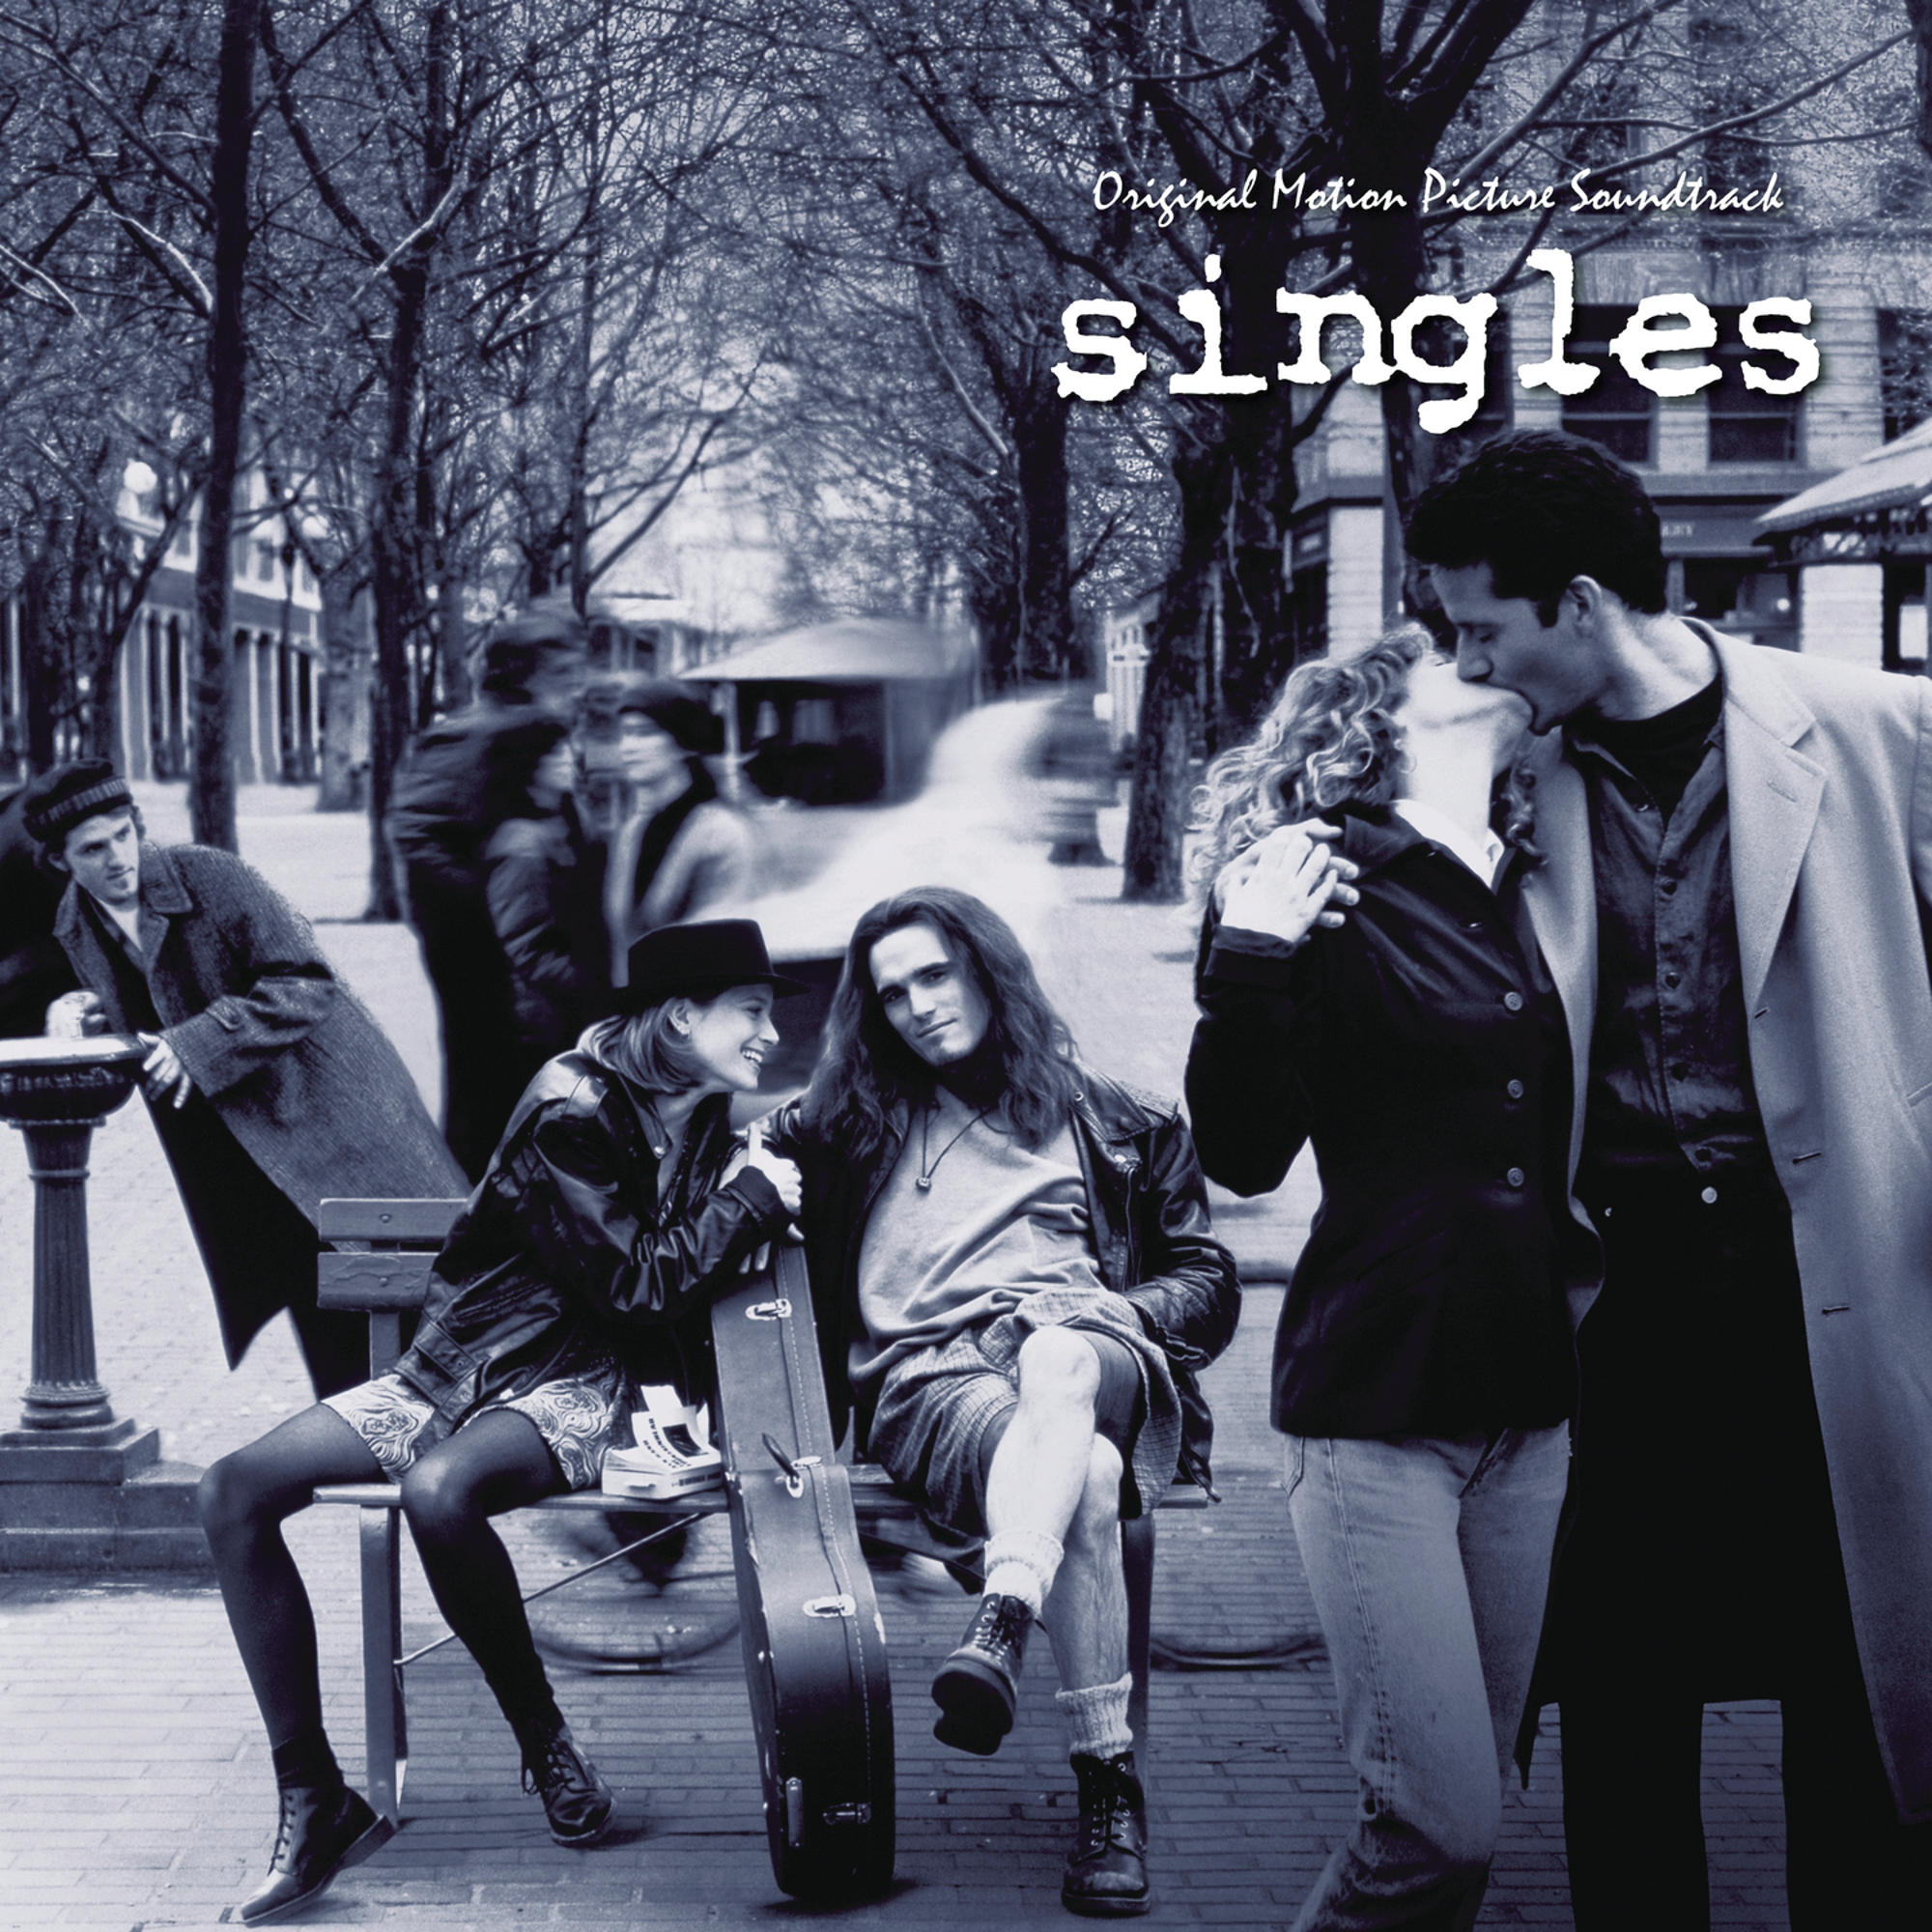 (CD) - - Singles/OST Edition) (Deluxe VARIOUS